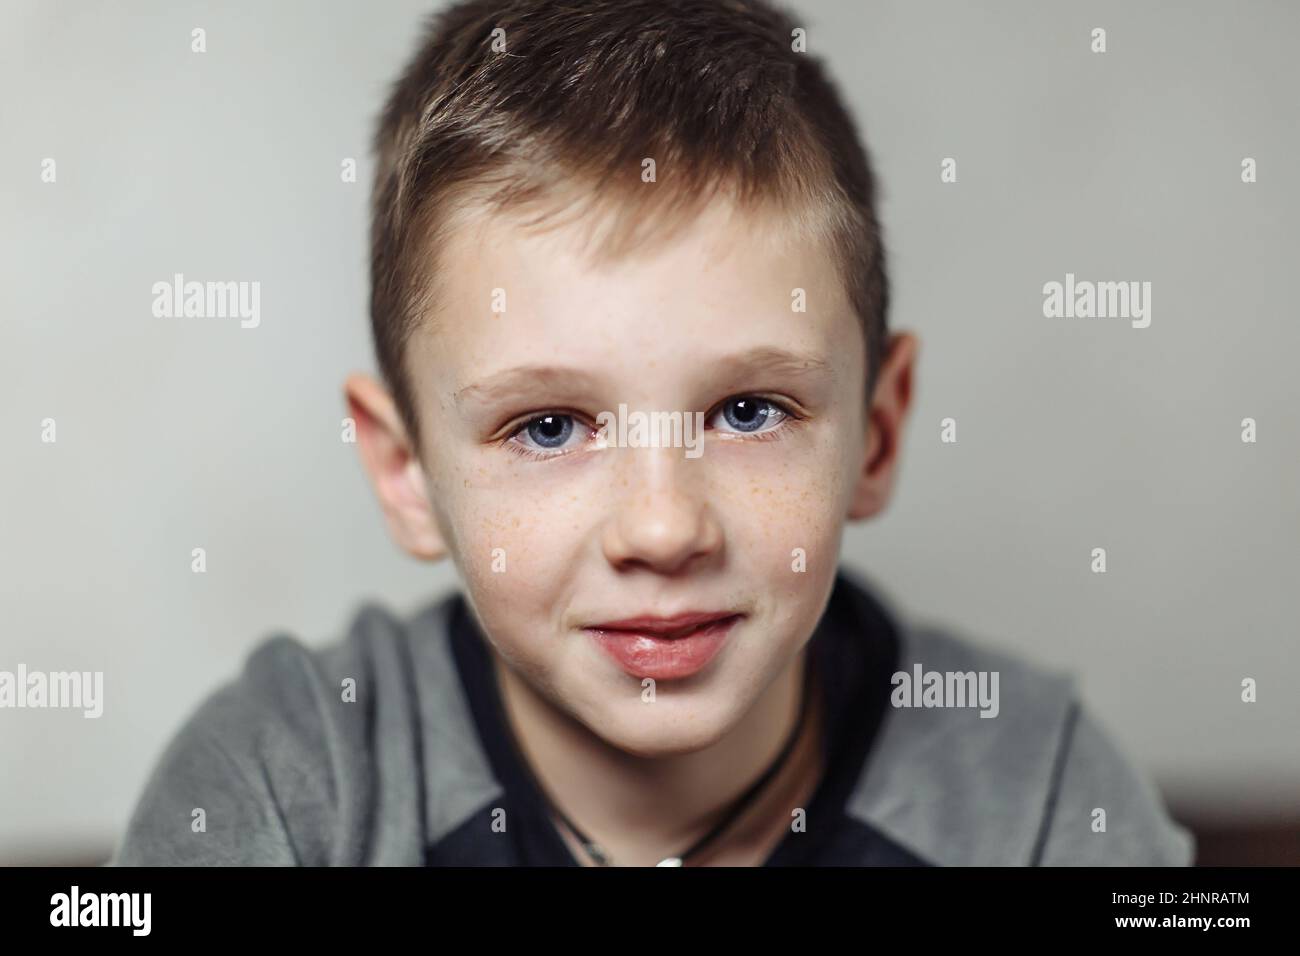 close-up portrait of serious caucasian boy with freckles in casual wear, boy looking in camera Stock Photo